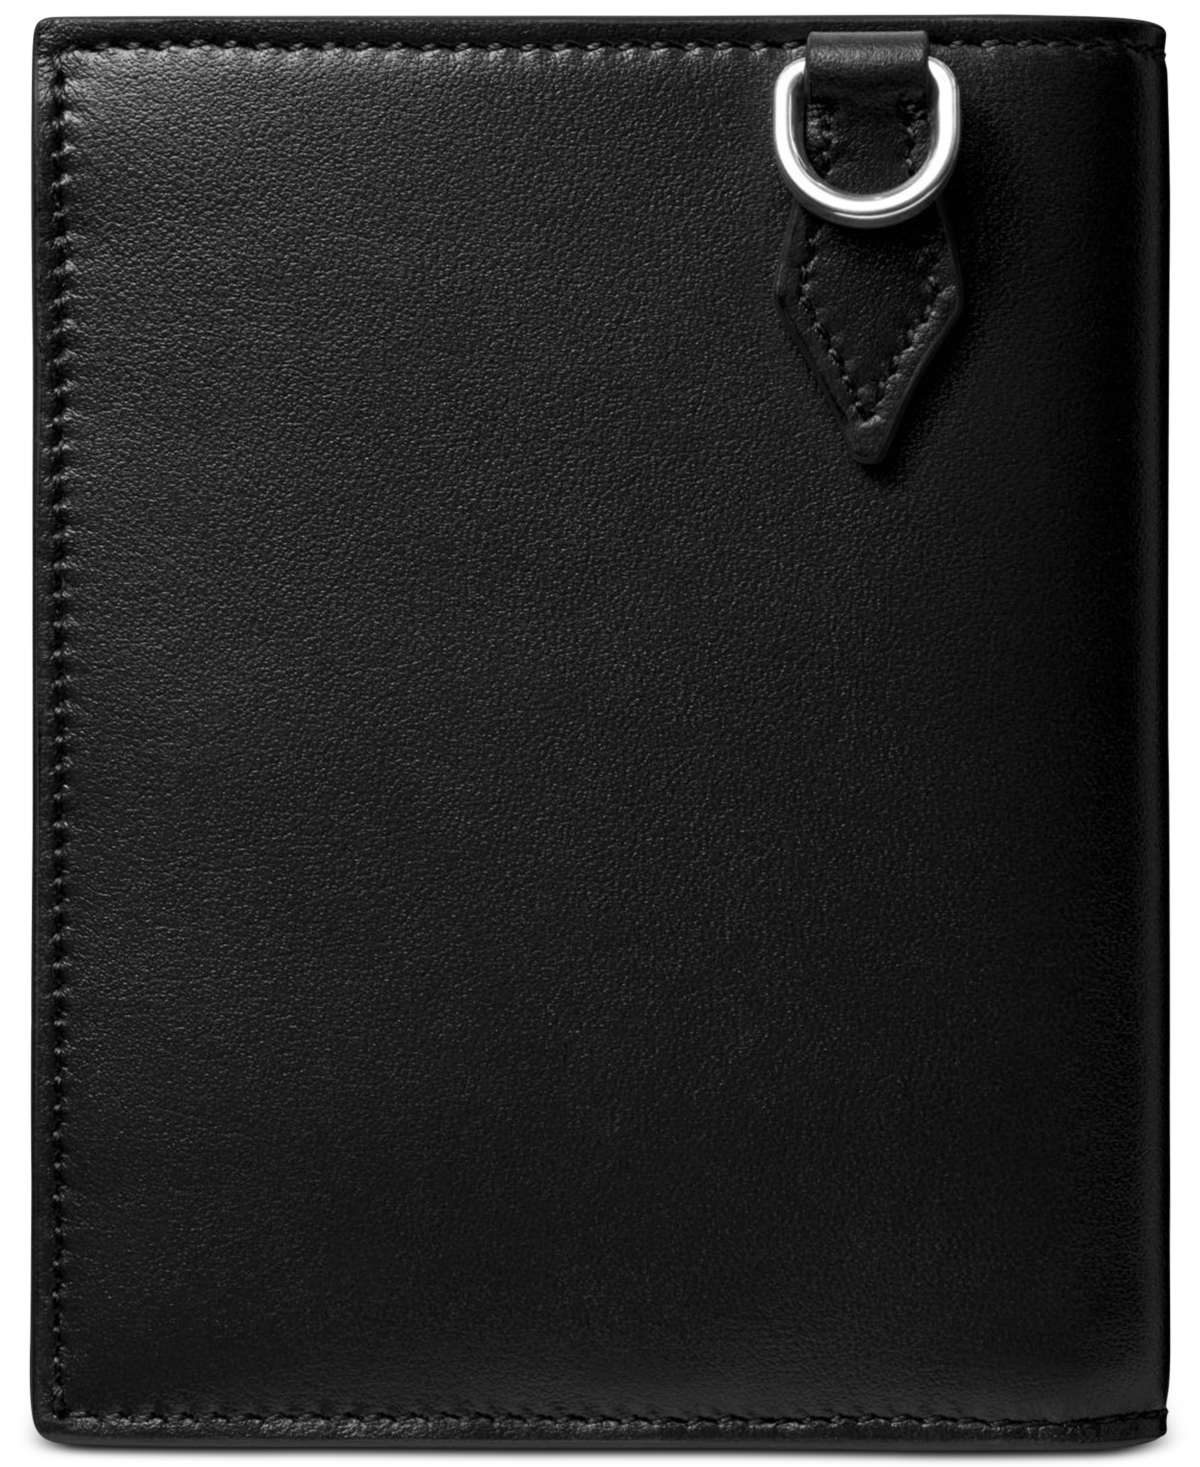 Shop Montblanc Meisterstuck 6 Card Compact Wallet In Black